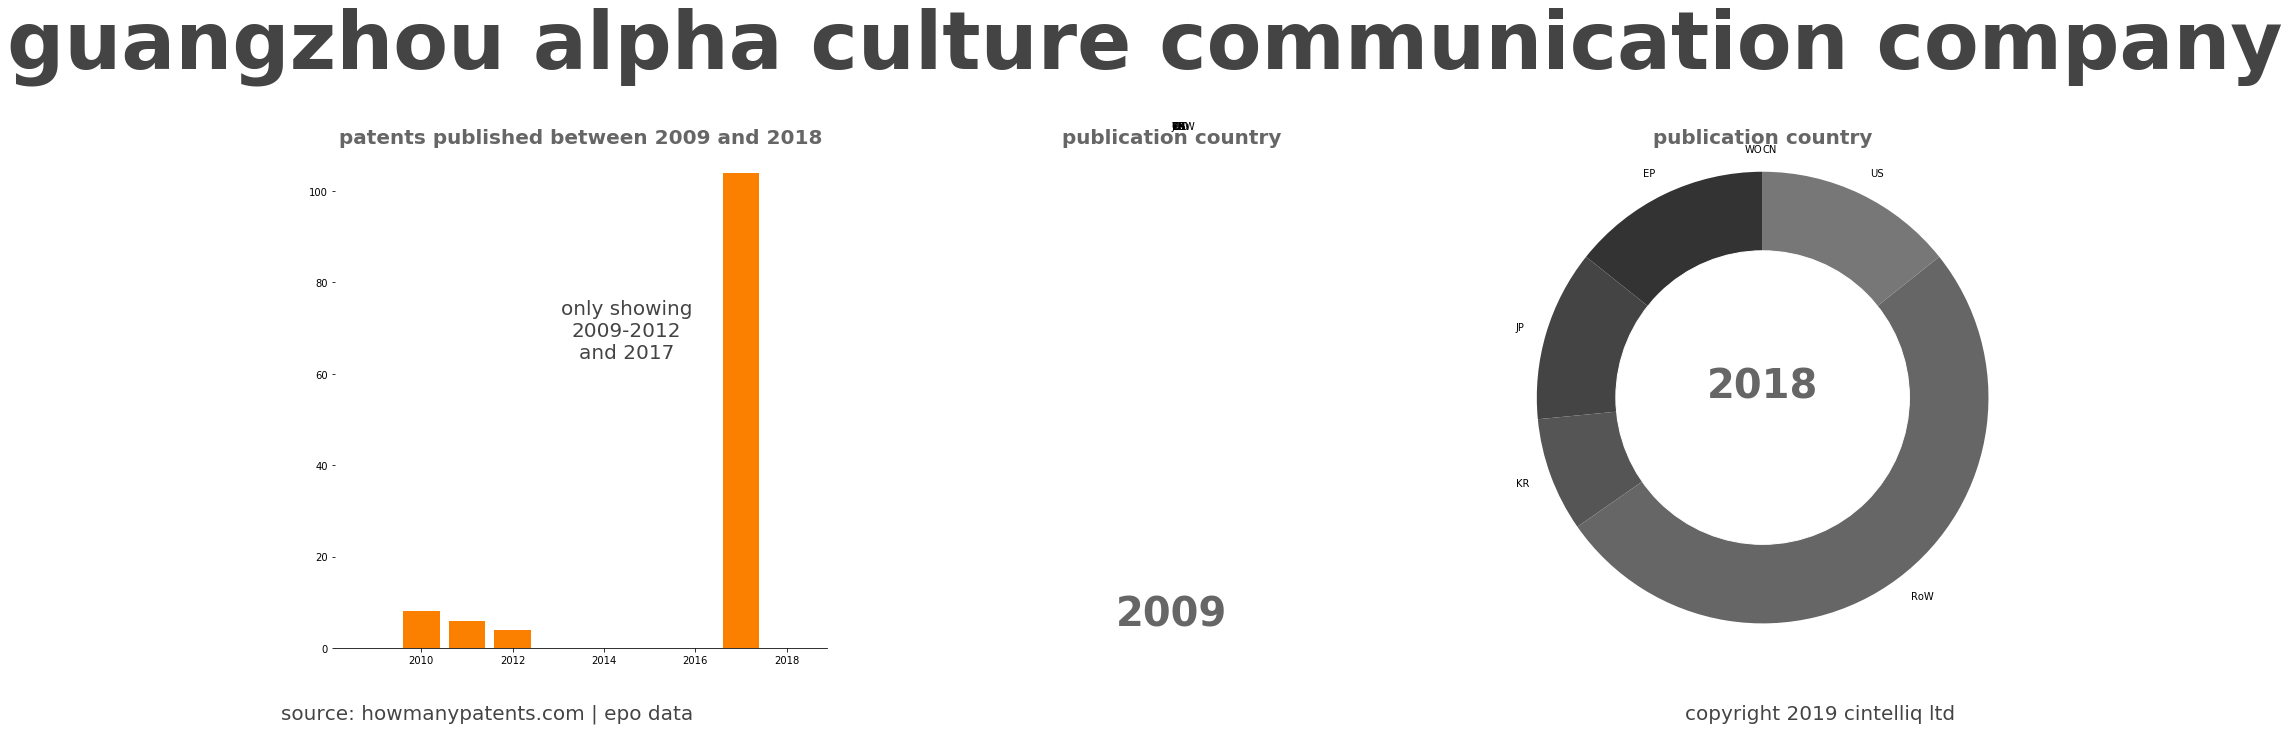 summary of patents for Guangzhou Alpha Culture Communication Company